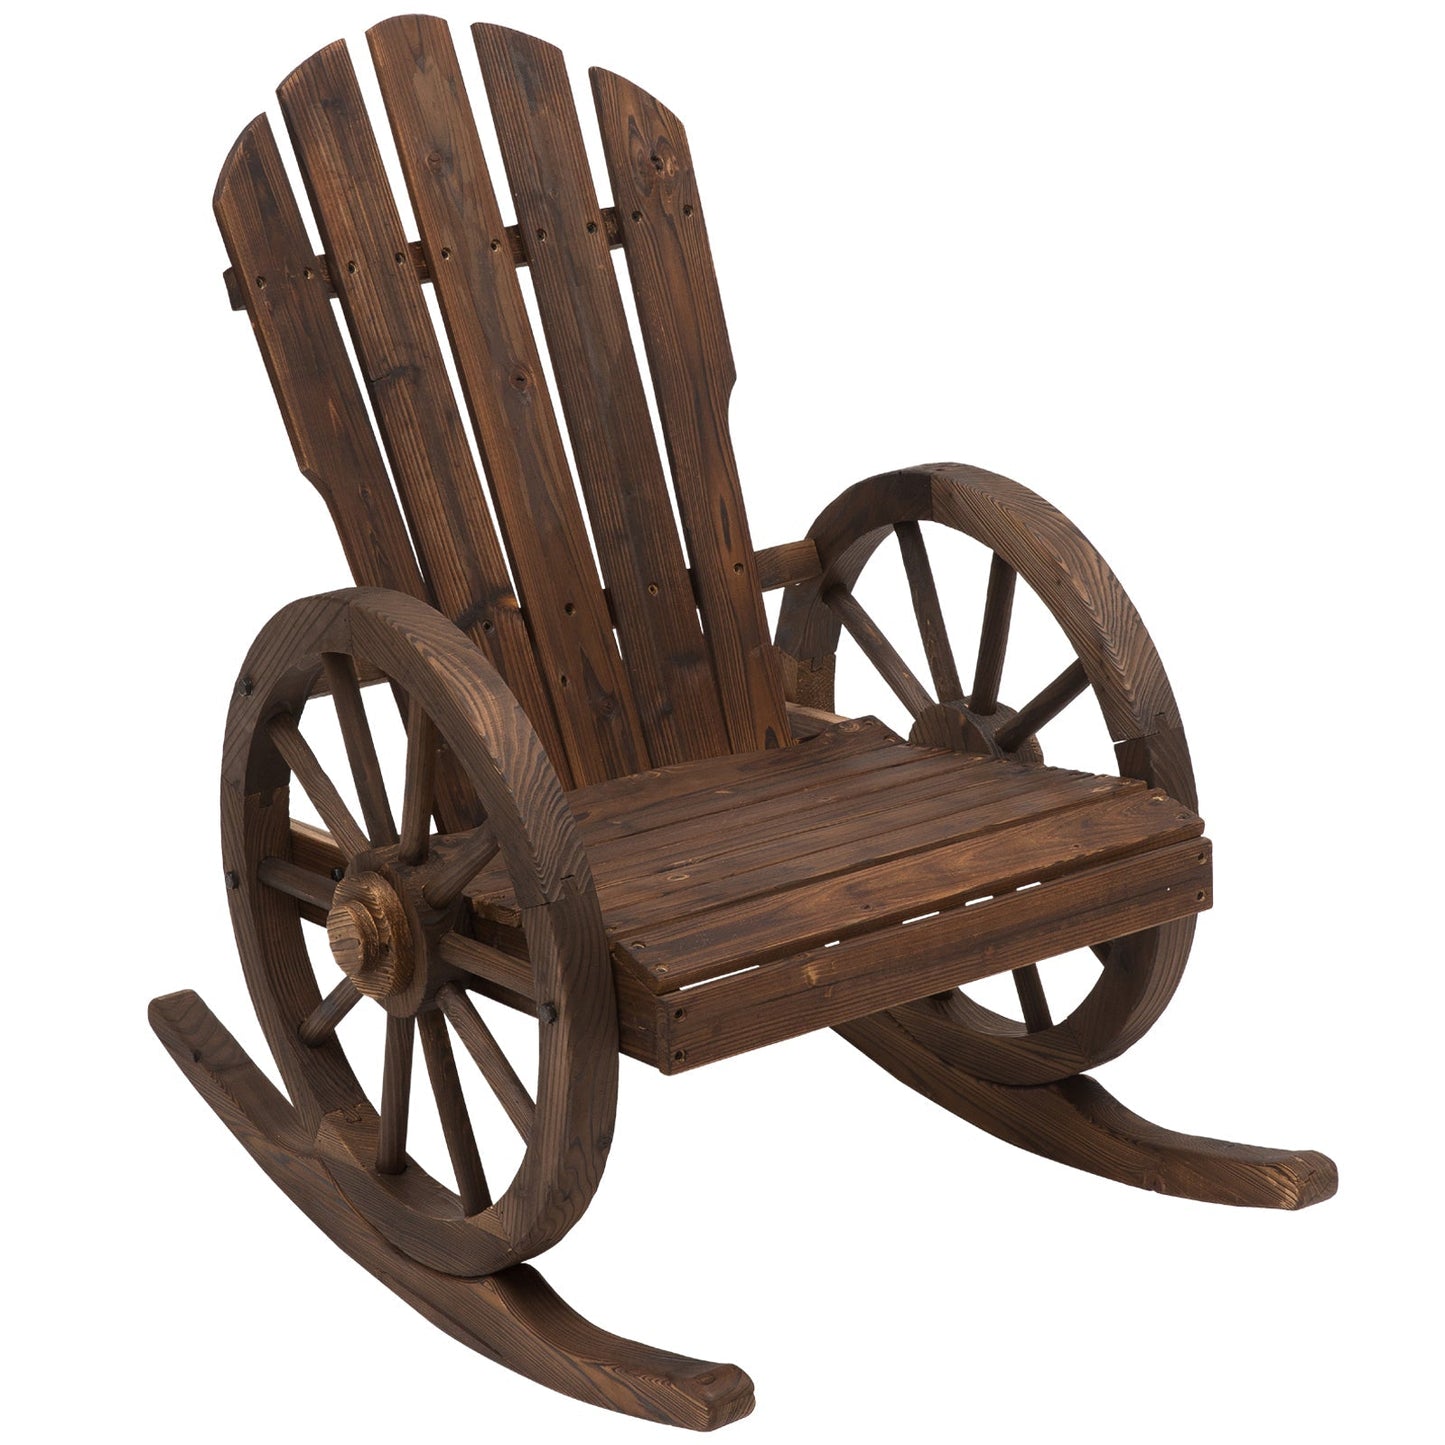 Outsunny adirontack style rocking chair, rustic design with 2 wheels, burnt red fir wood, 88x68x92cm